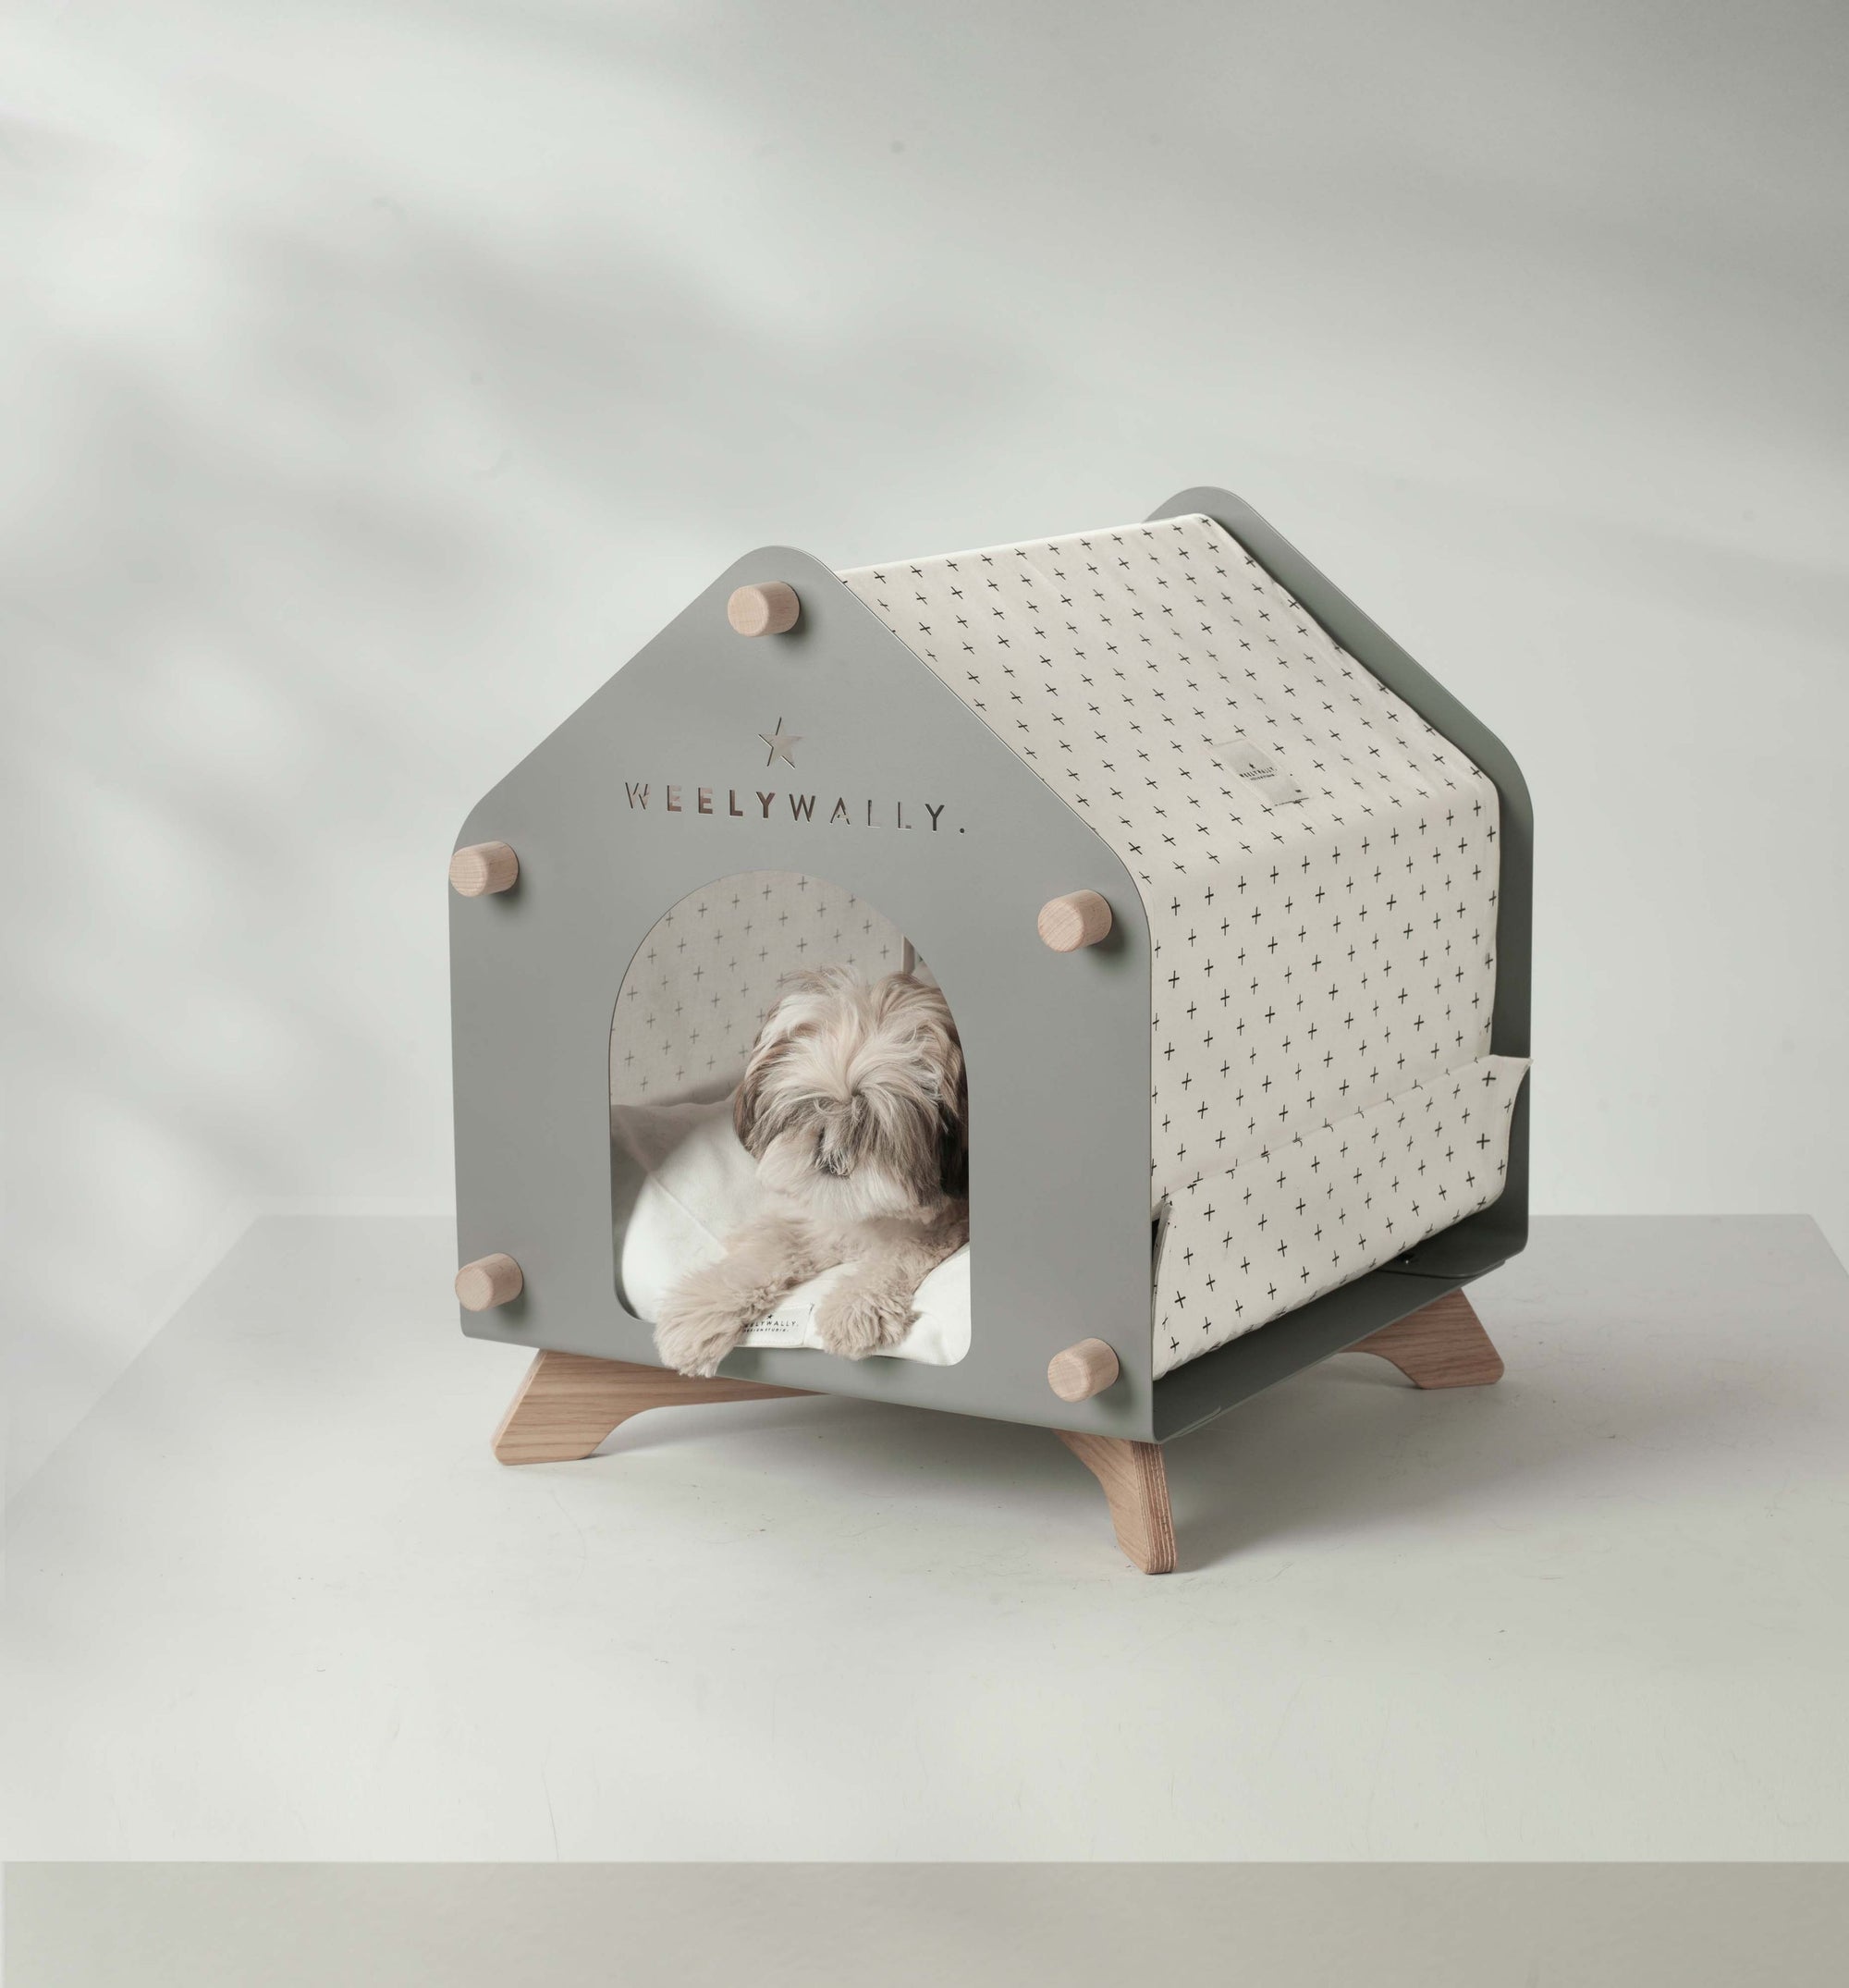 Every pet deserves the best - house & bed for your cat's or dog's!